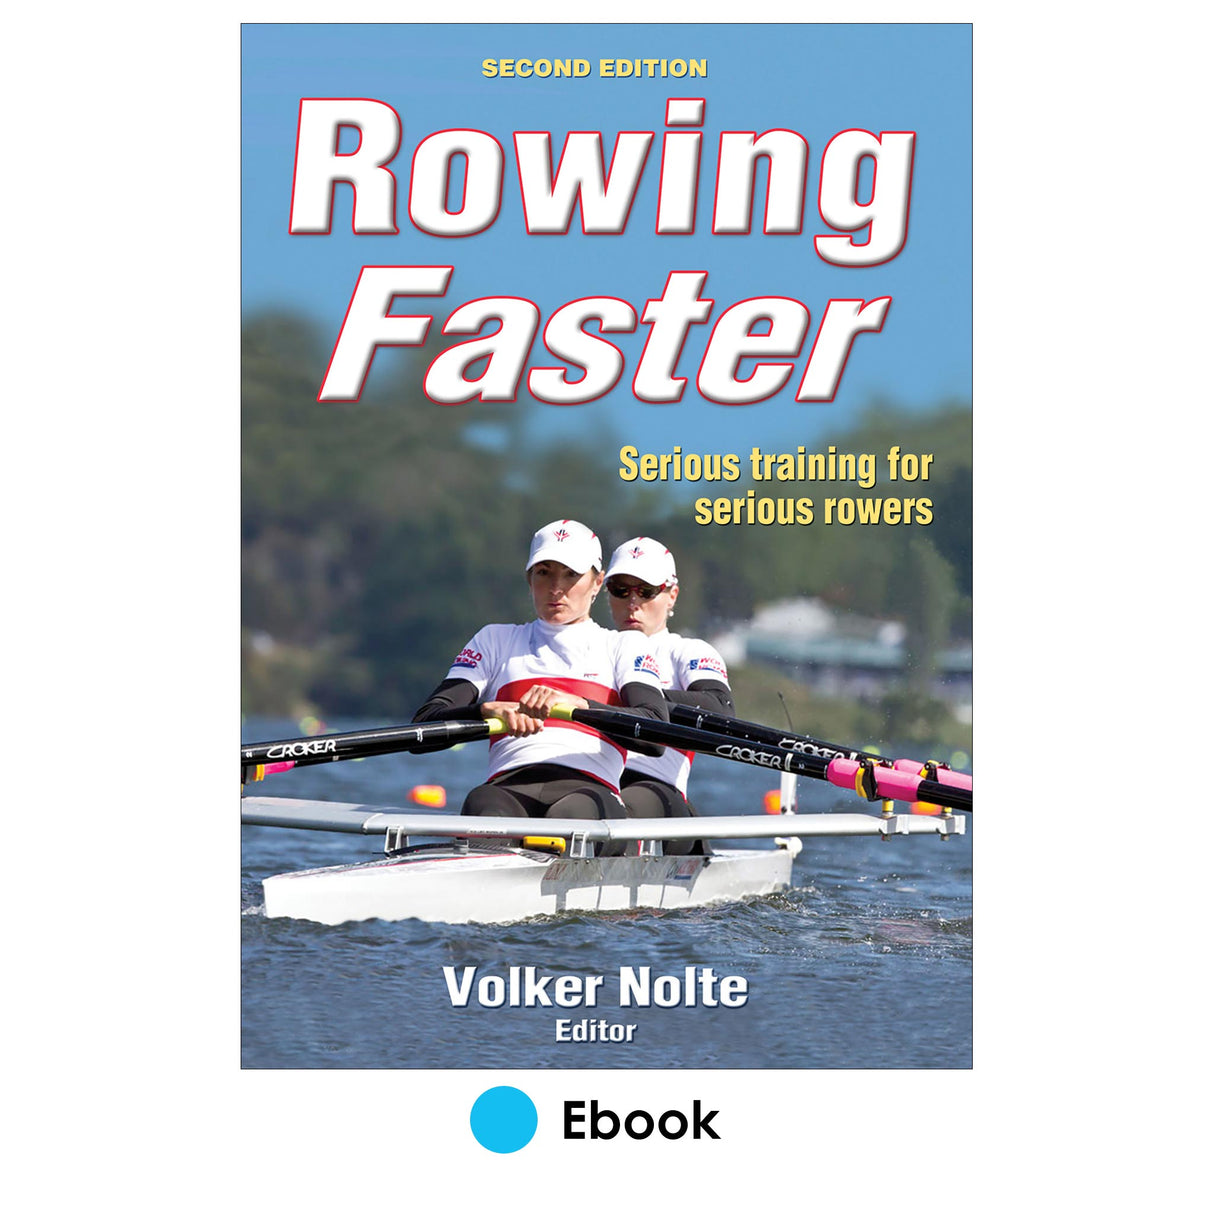 Rowing Faster 2nd Edition PDF